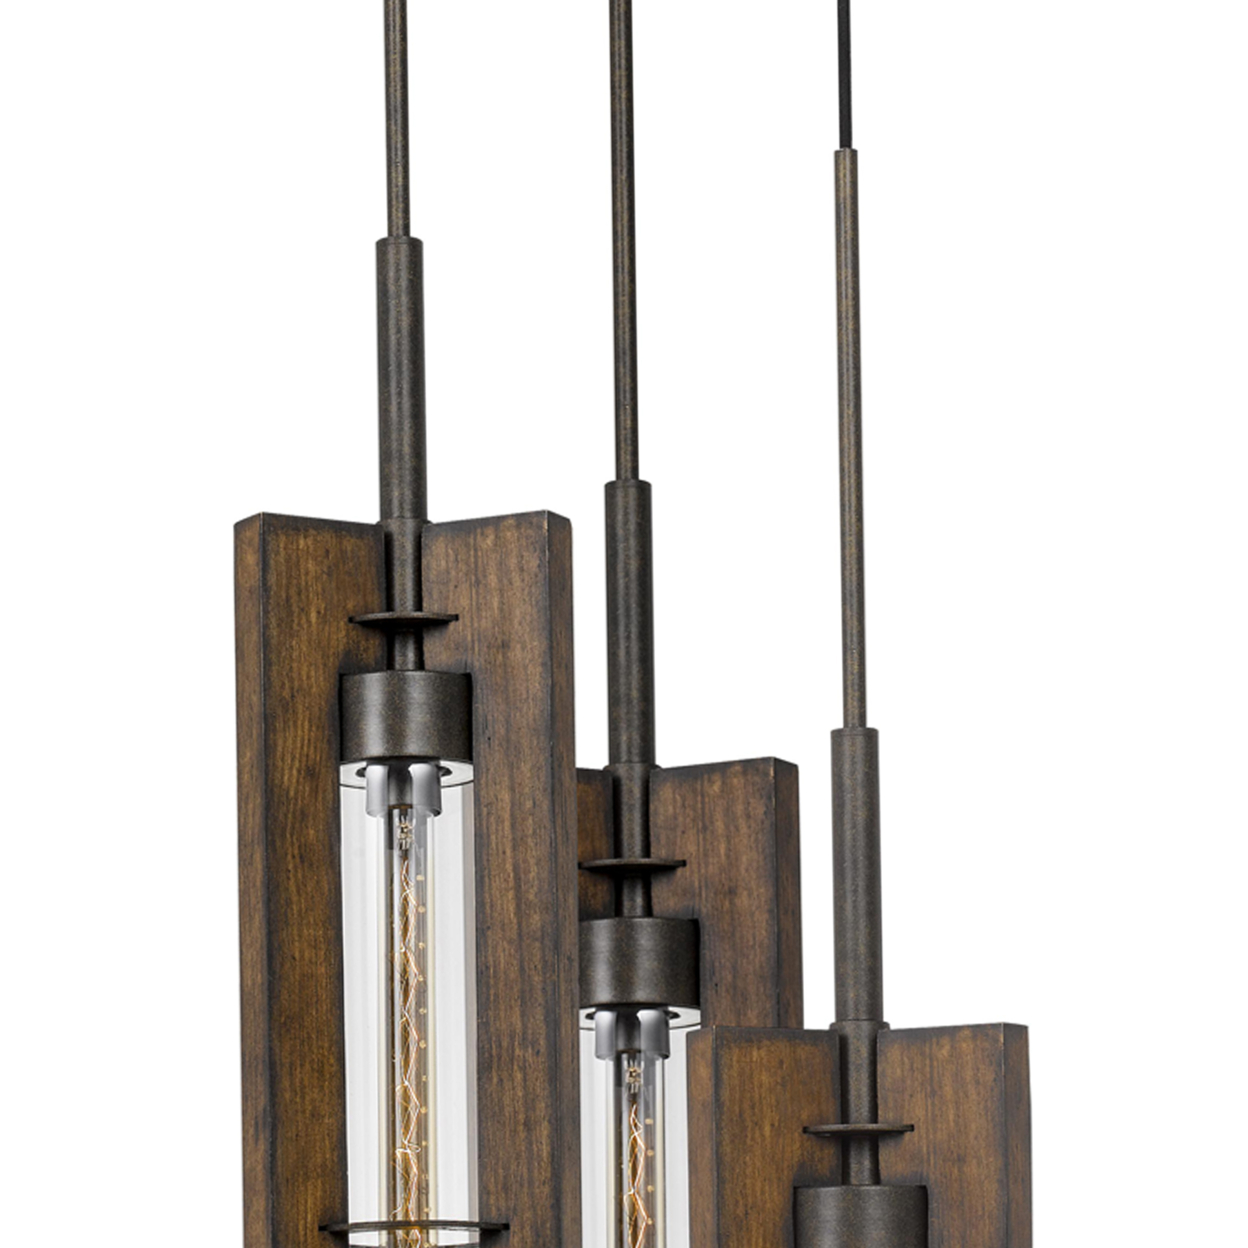 3 Bulb Wind Chime Design Chandelier With Wooden Shades, Brown And Black- Saltoro Sherpi